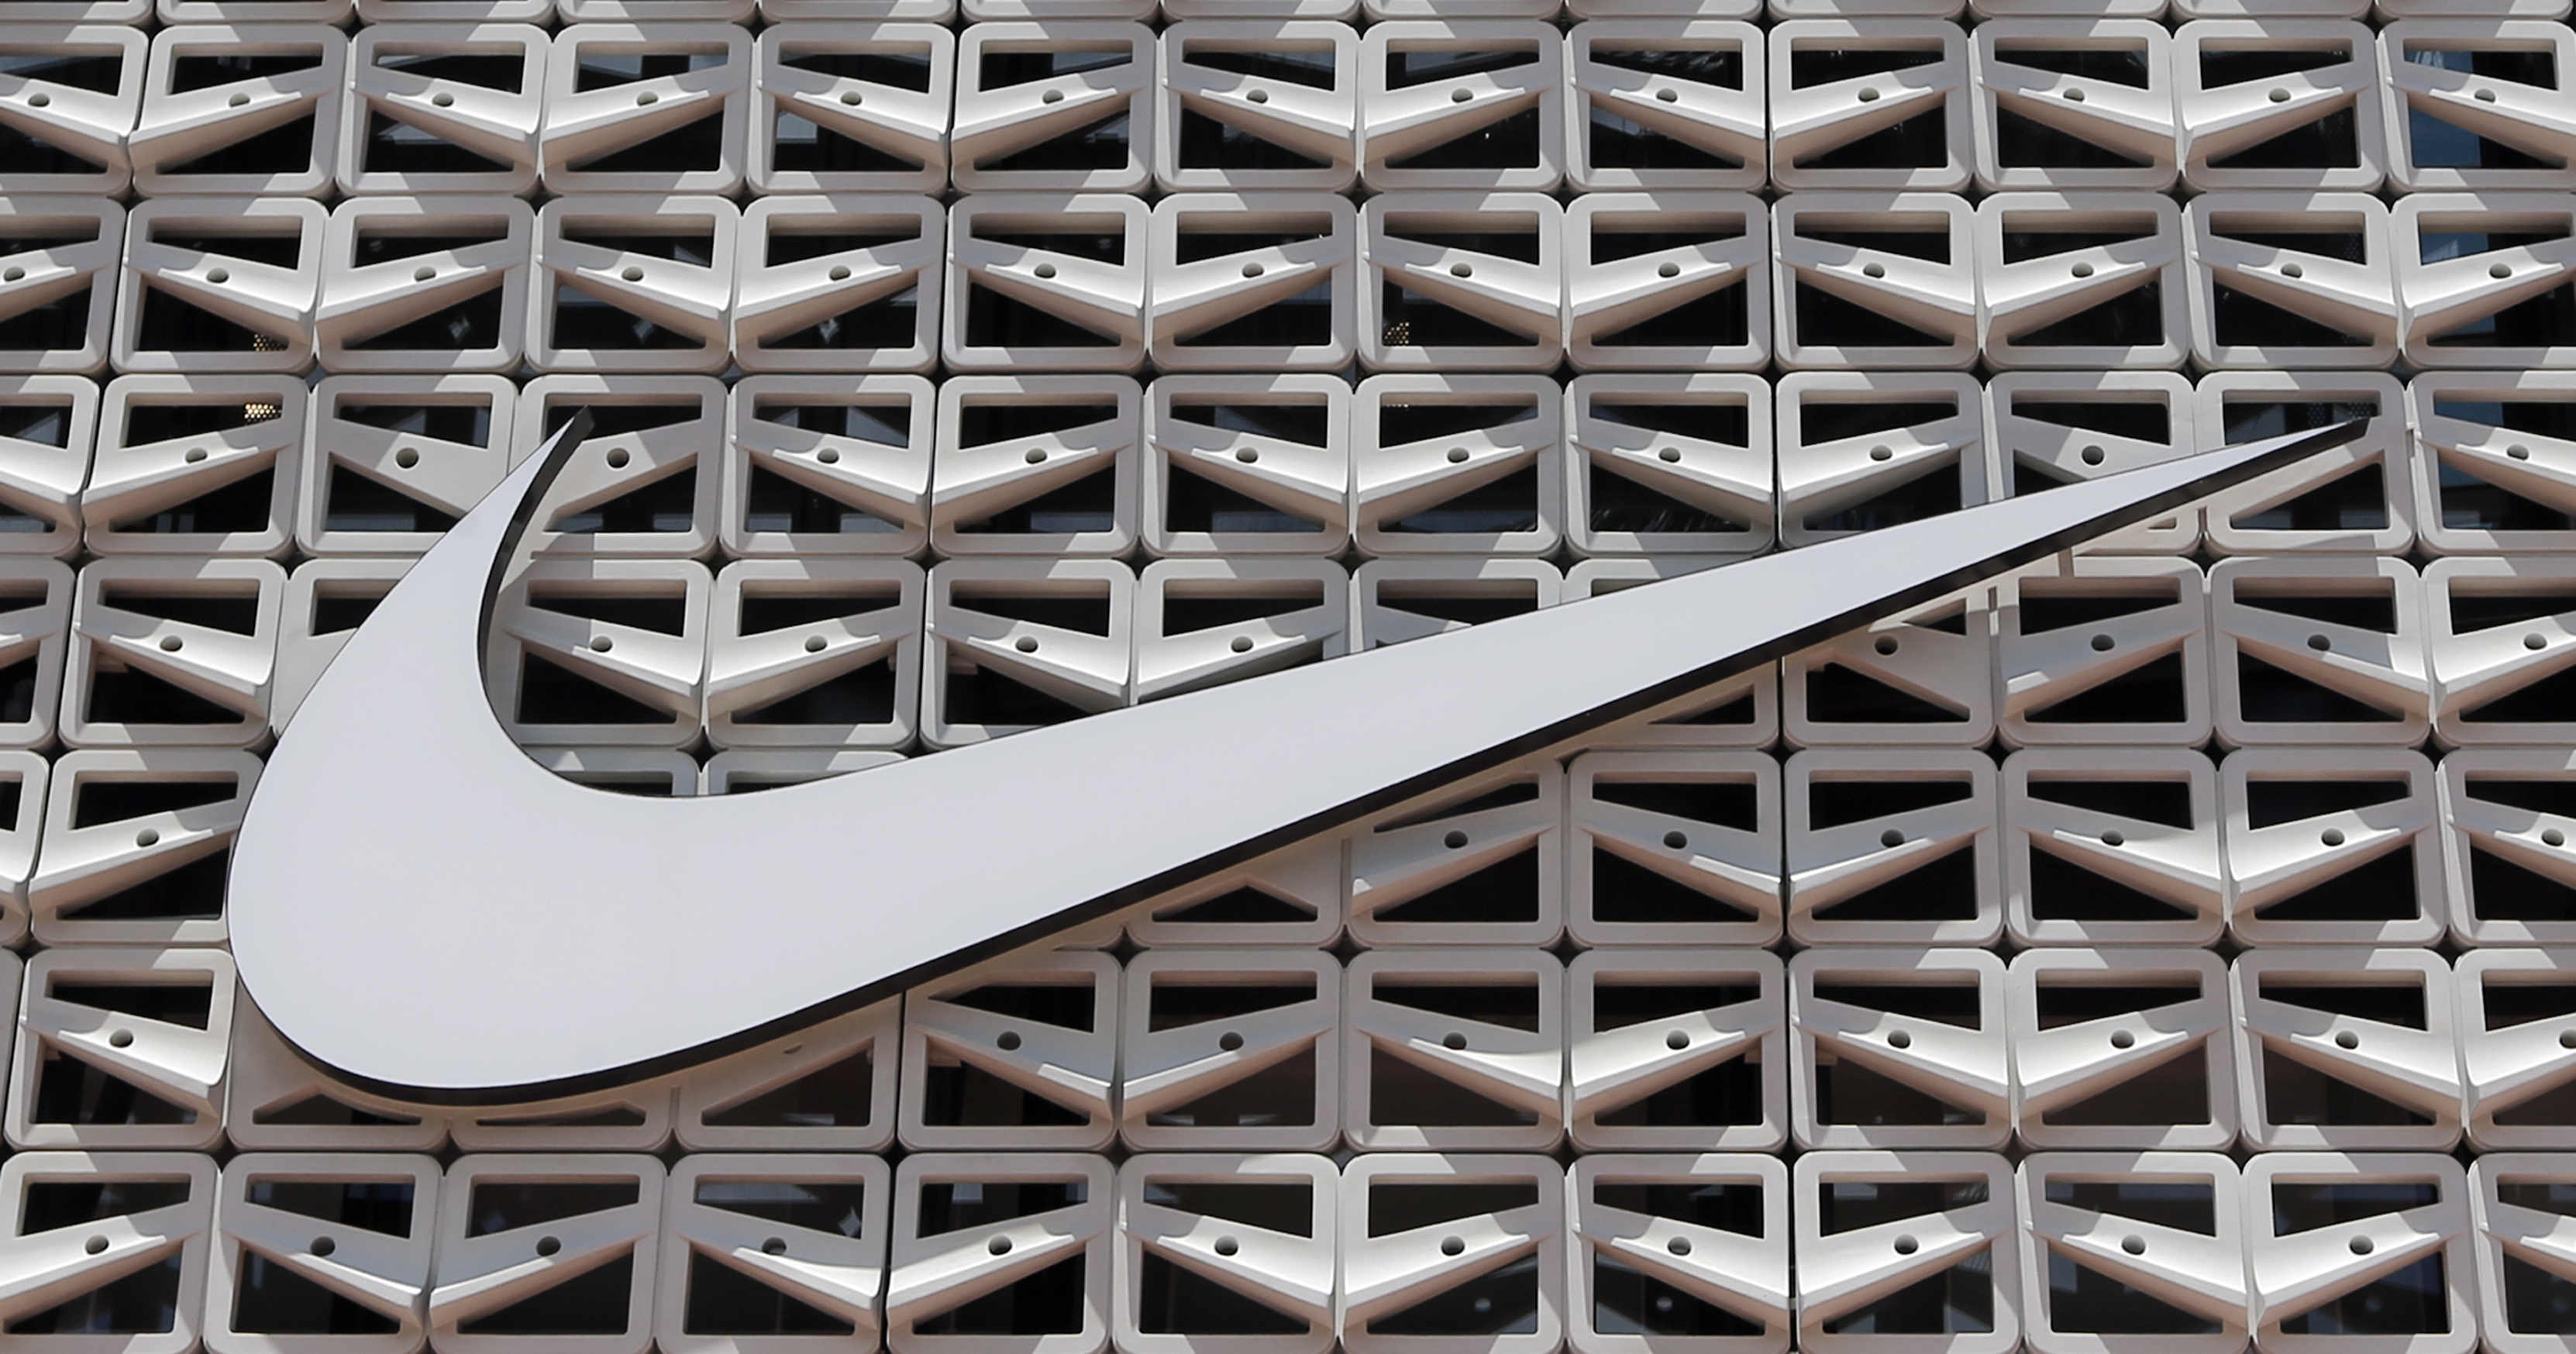 Oude man expeditie hypotheek Nike products are becoming harder to find in stores. Here's why. - nj.com